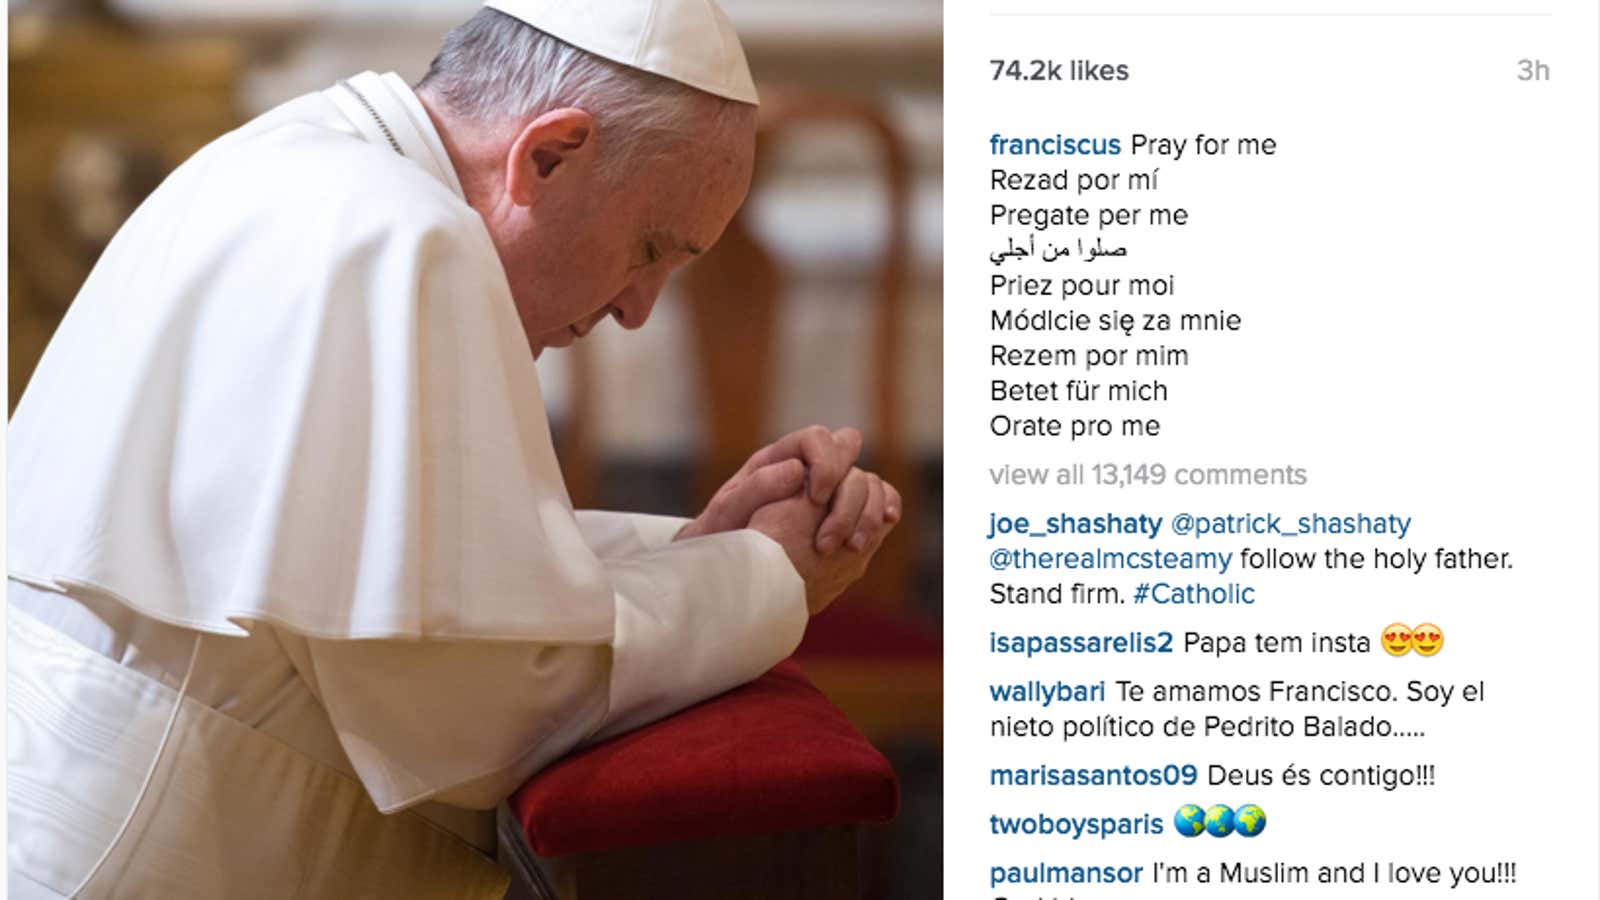 “I am beginning a new journey, on Instagram, to walk with you along the path of mercy and the tenderness of God.”